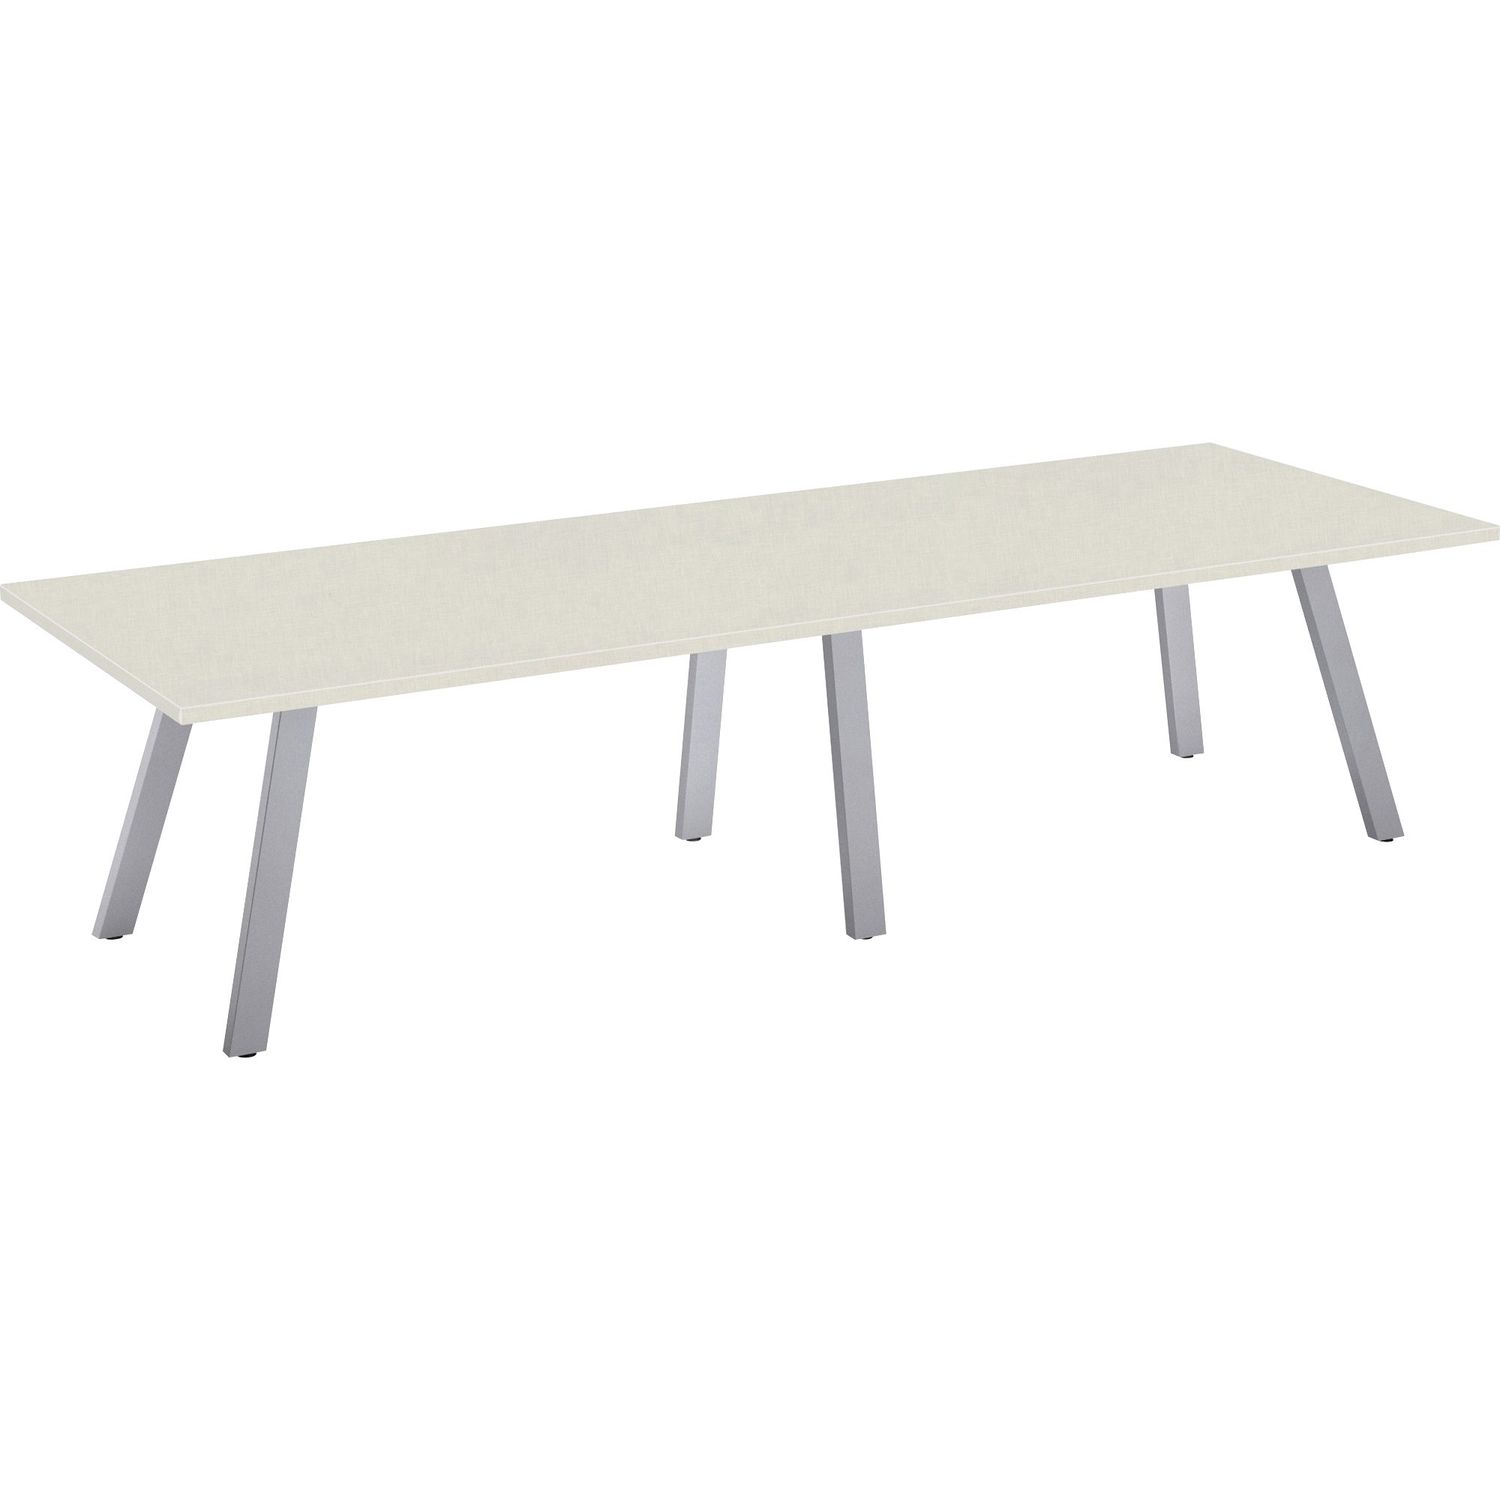 42x108 AIM XL Conference Table Laminated Top, 108" Table Top Width x 42" Table Top Depth, 29" Height, Assembly Required, Crisp Linen